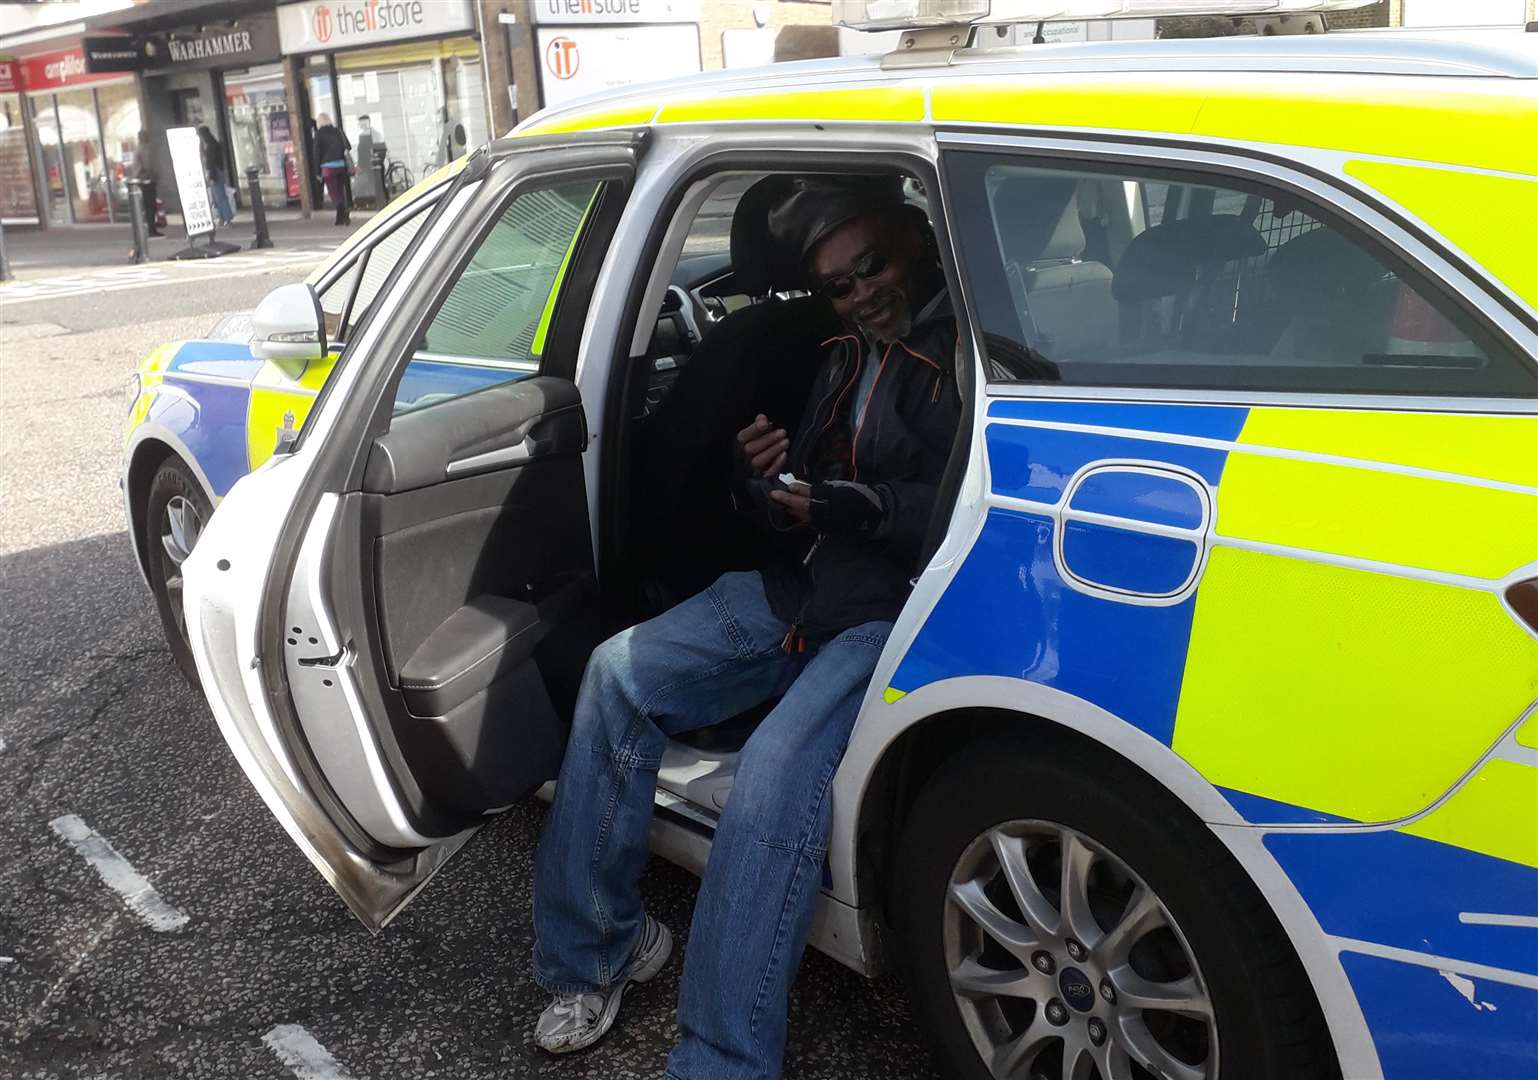 A passerby has a sit-down in the back of an unattended police car. Picture: Phil Martin.